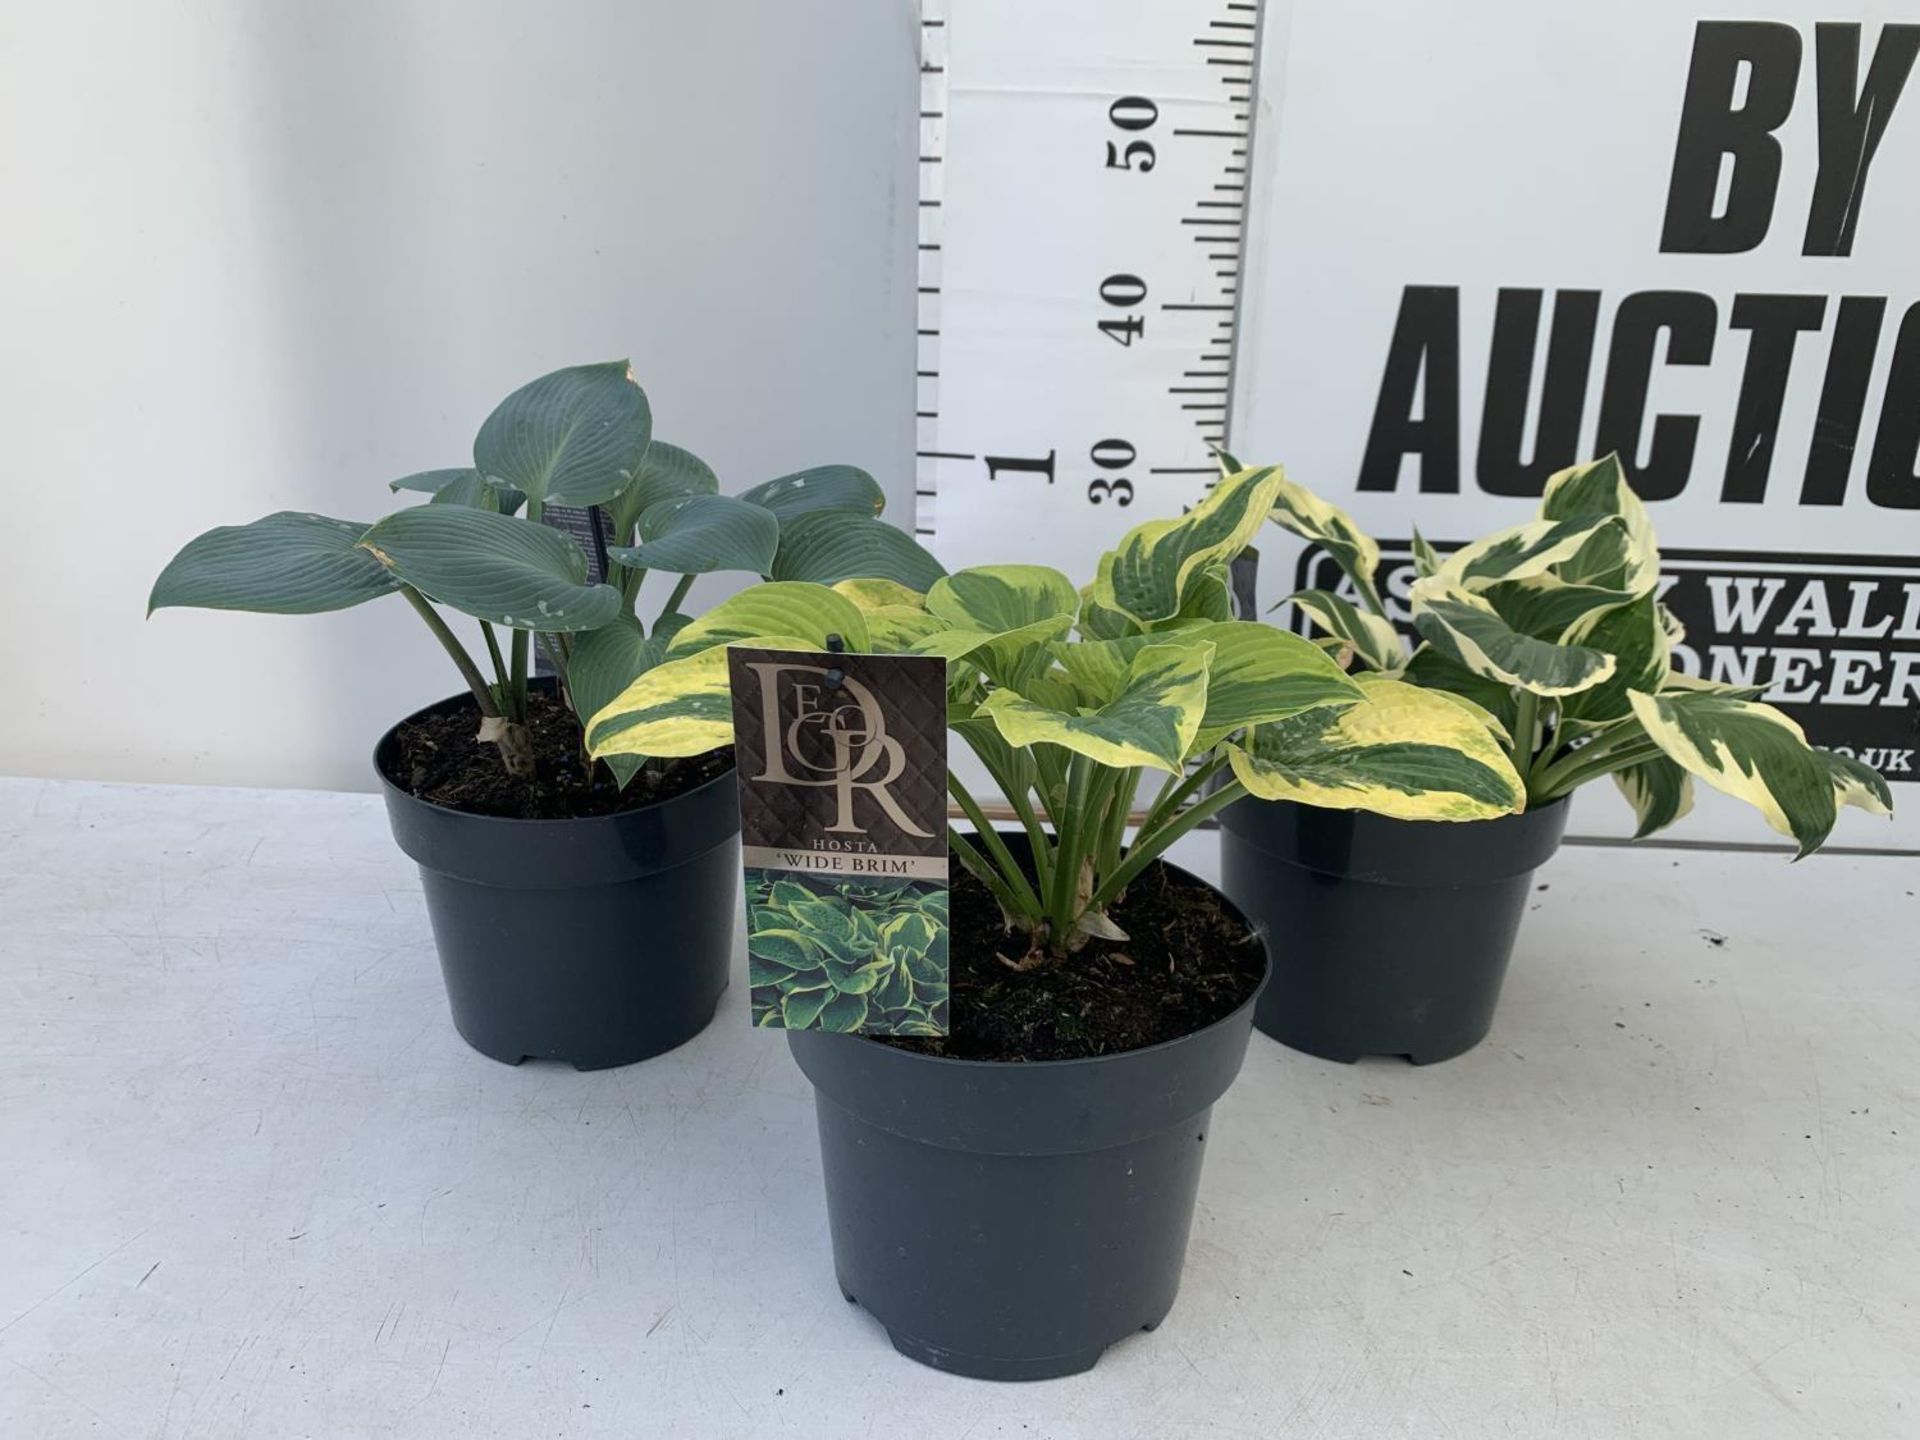 THREE MIXED VARIETY HOSTAS TO INCLUDE WIDE BRIM, HALCYON AND PATRIOT IN 3 LTR POTS 30CM TALL TO BE - Image 2 of 16